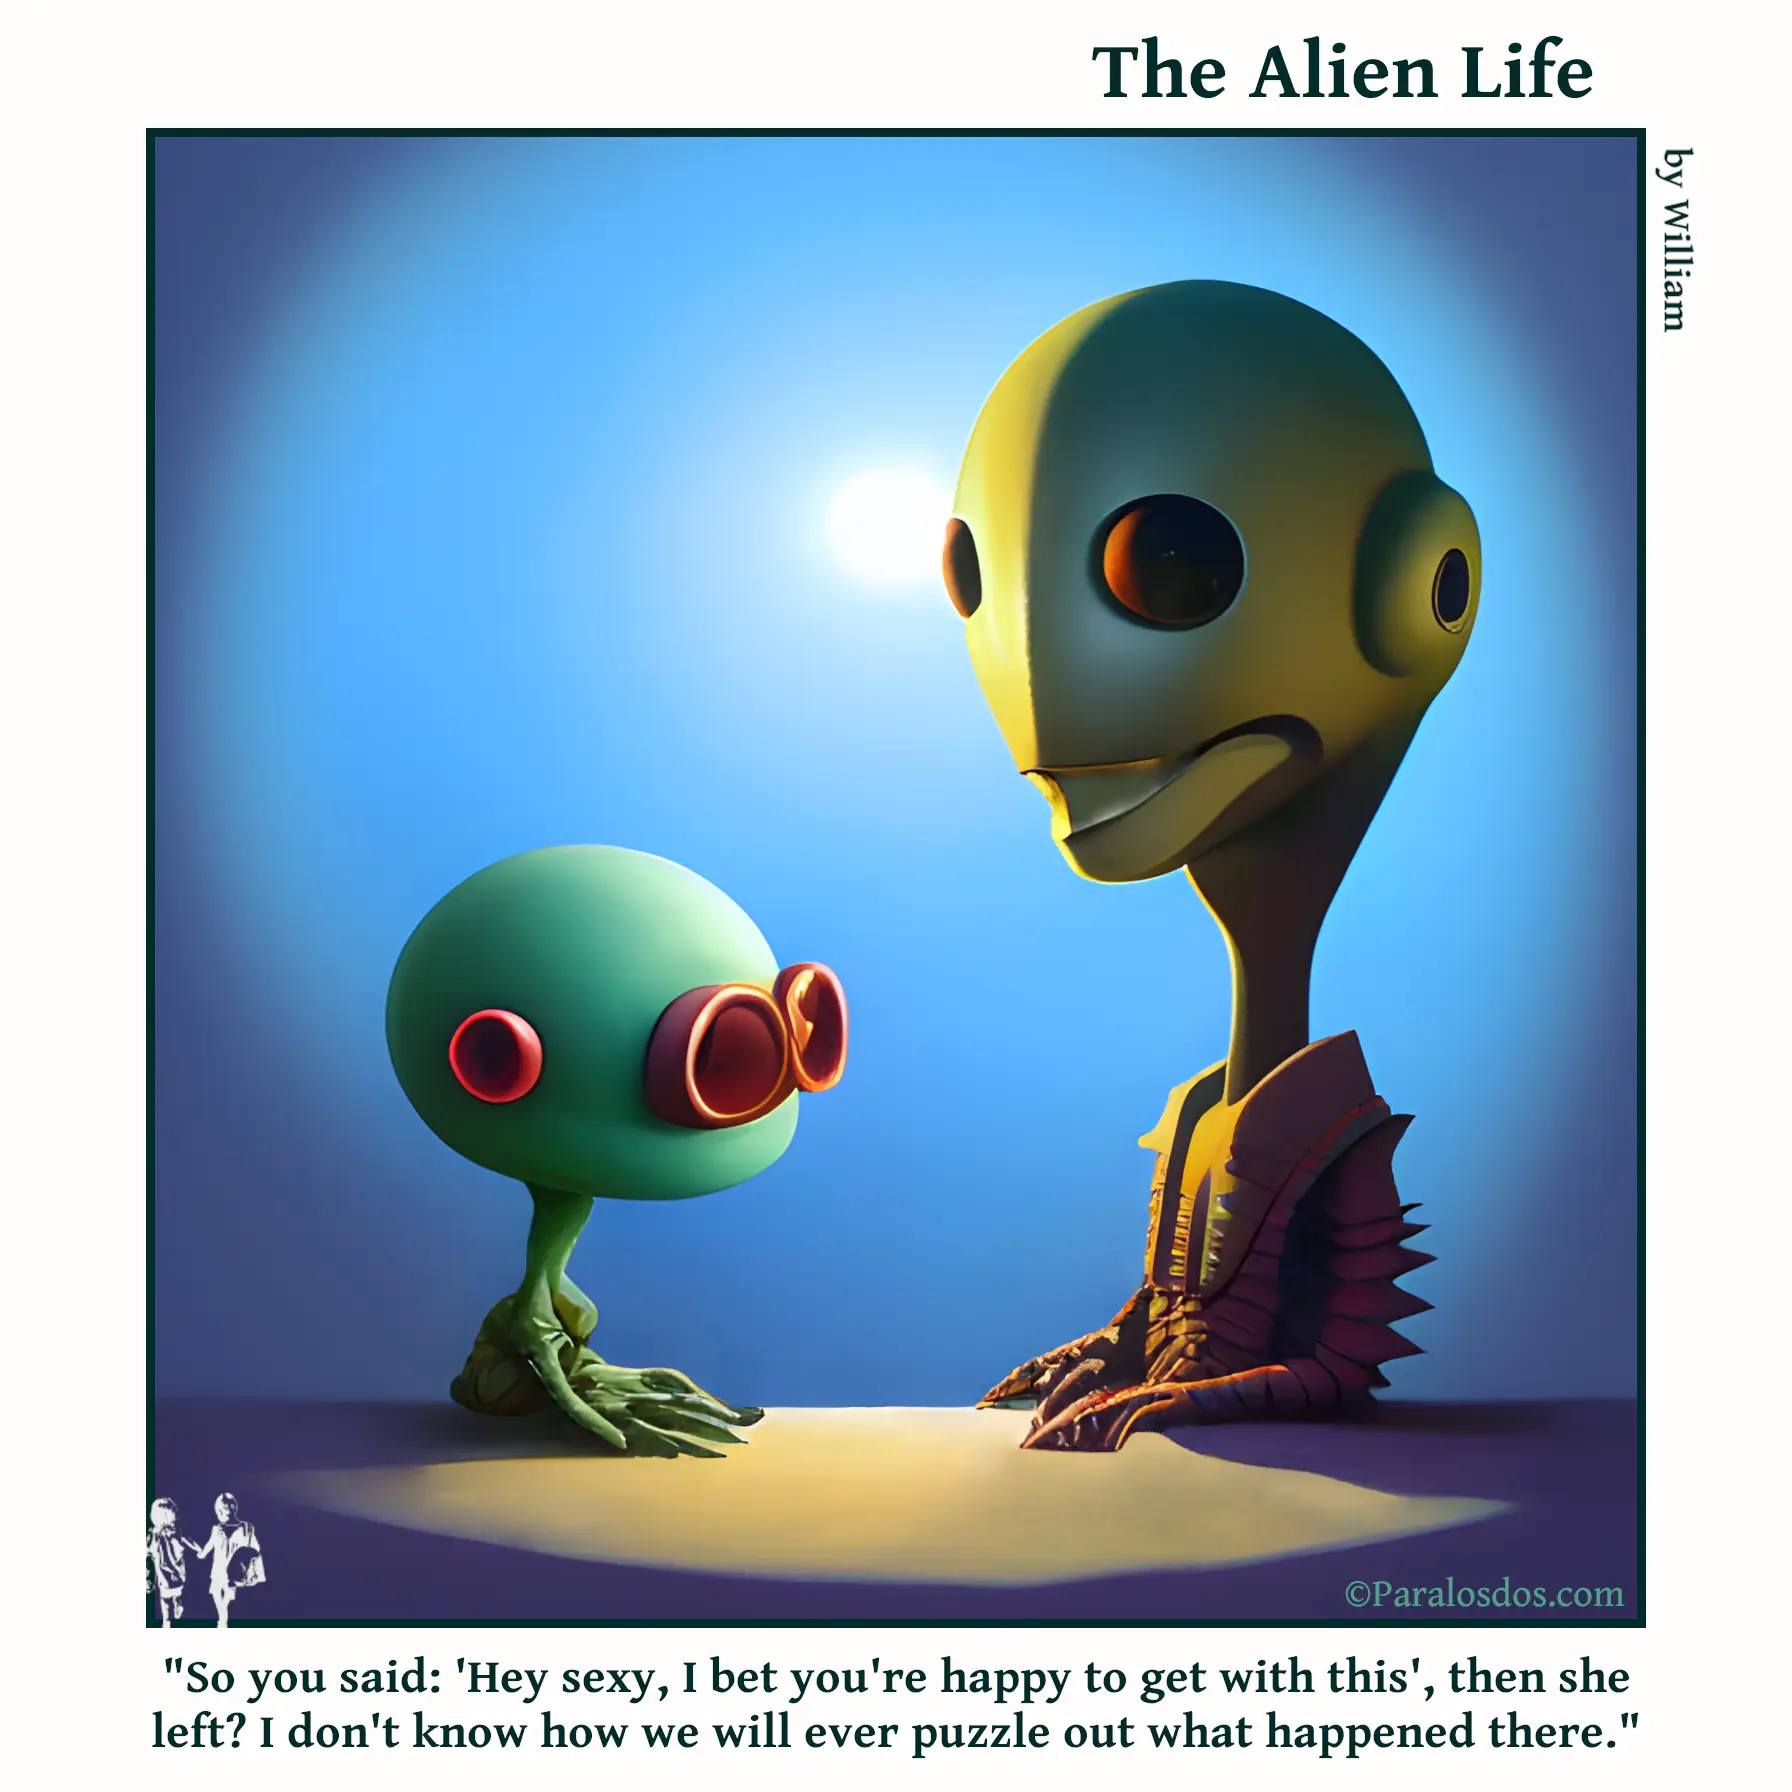 The Alien Life, one panel Comic. Two aliens are talking. The caption reads: "So you said: 'Hey sexy, I bet you're happy to get with this', then she left? I don't know how we will ever puzzle out what happened there."